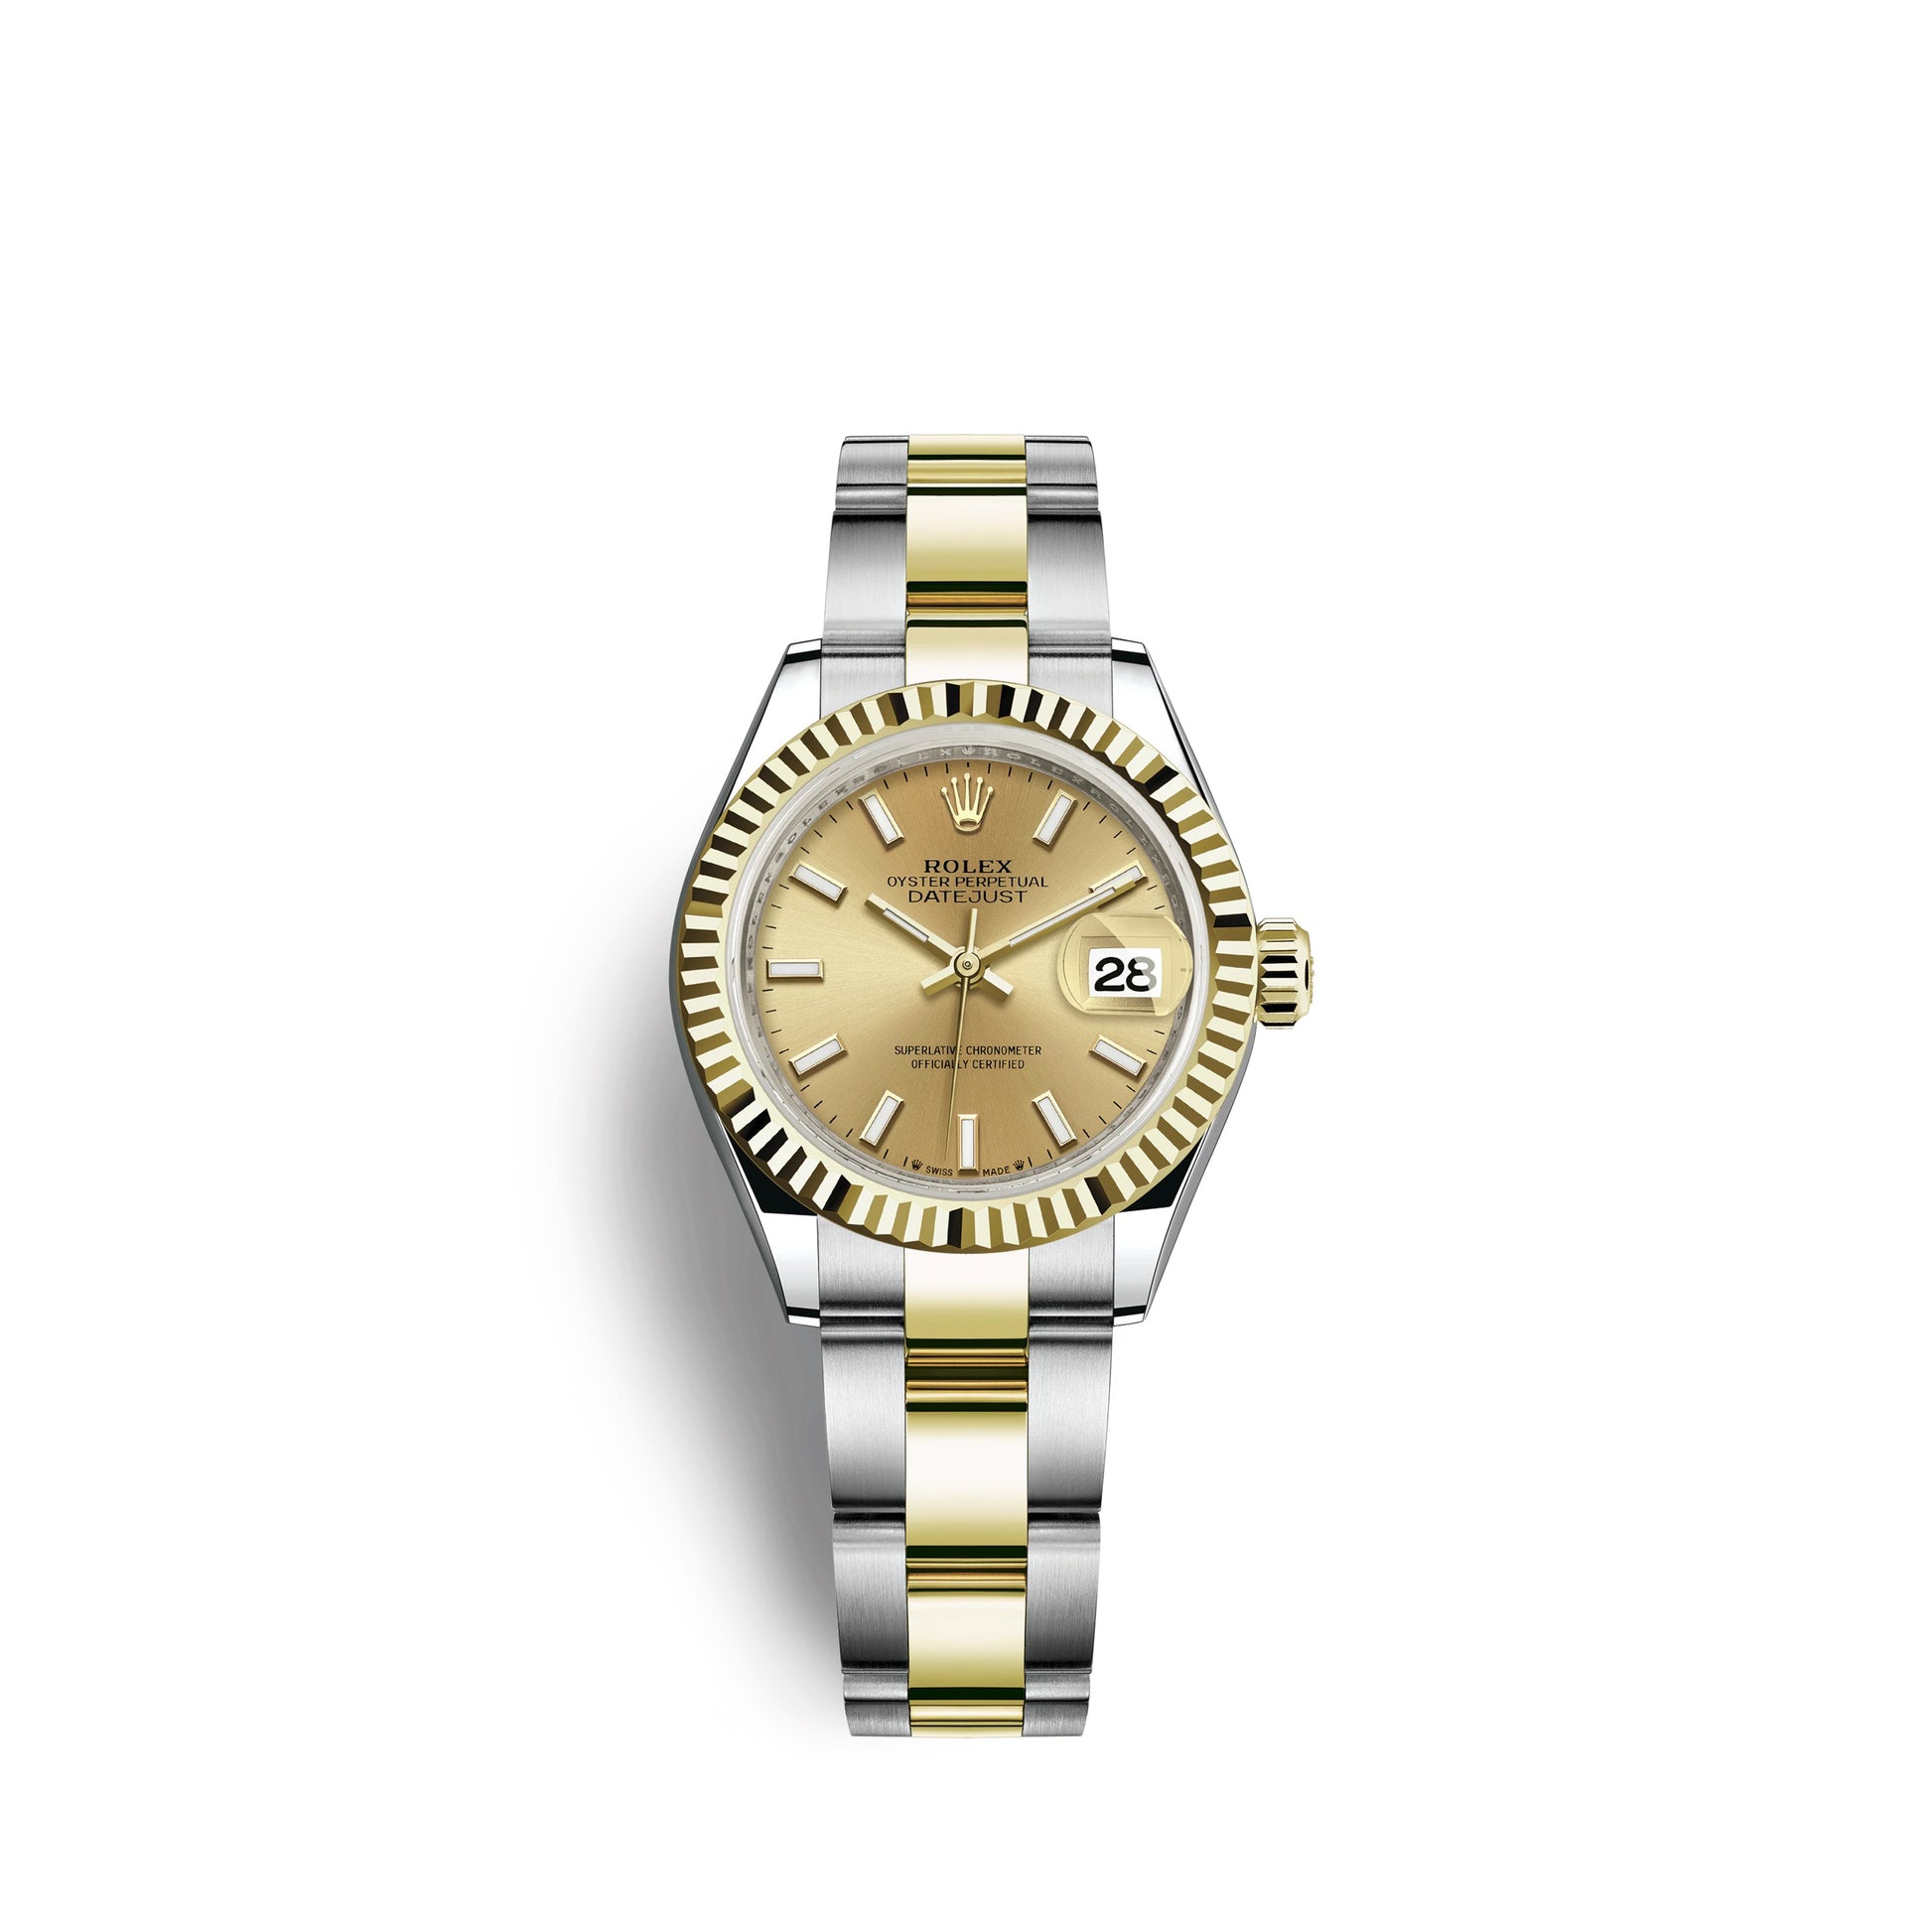 Rolex Lady-Datejust 28, Oystersteel and 18k Yellow Gold, Ref# 279173-0002